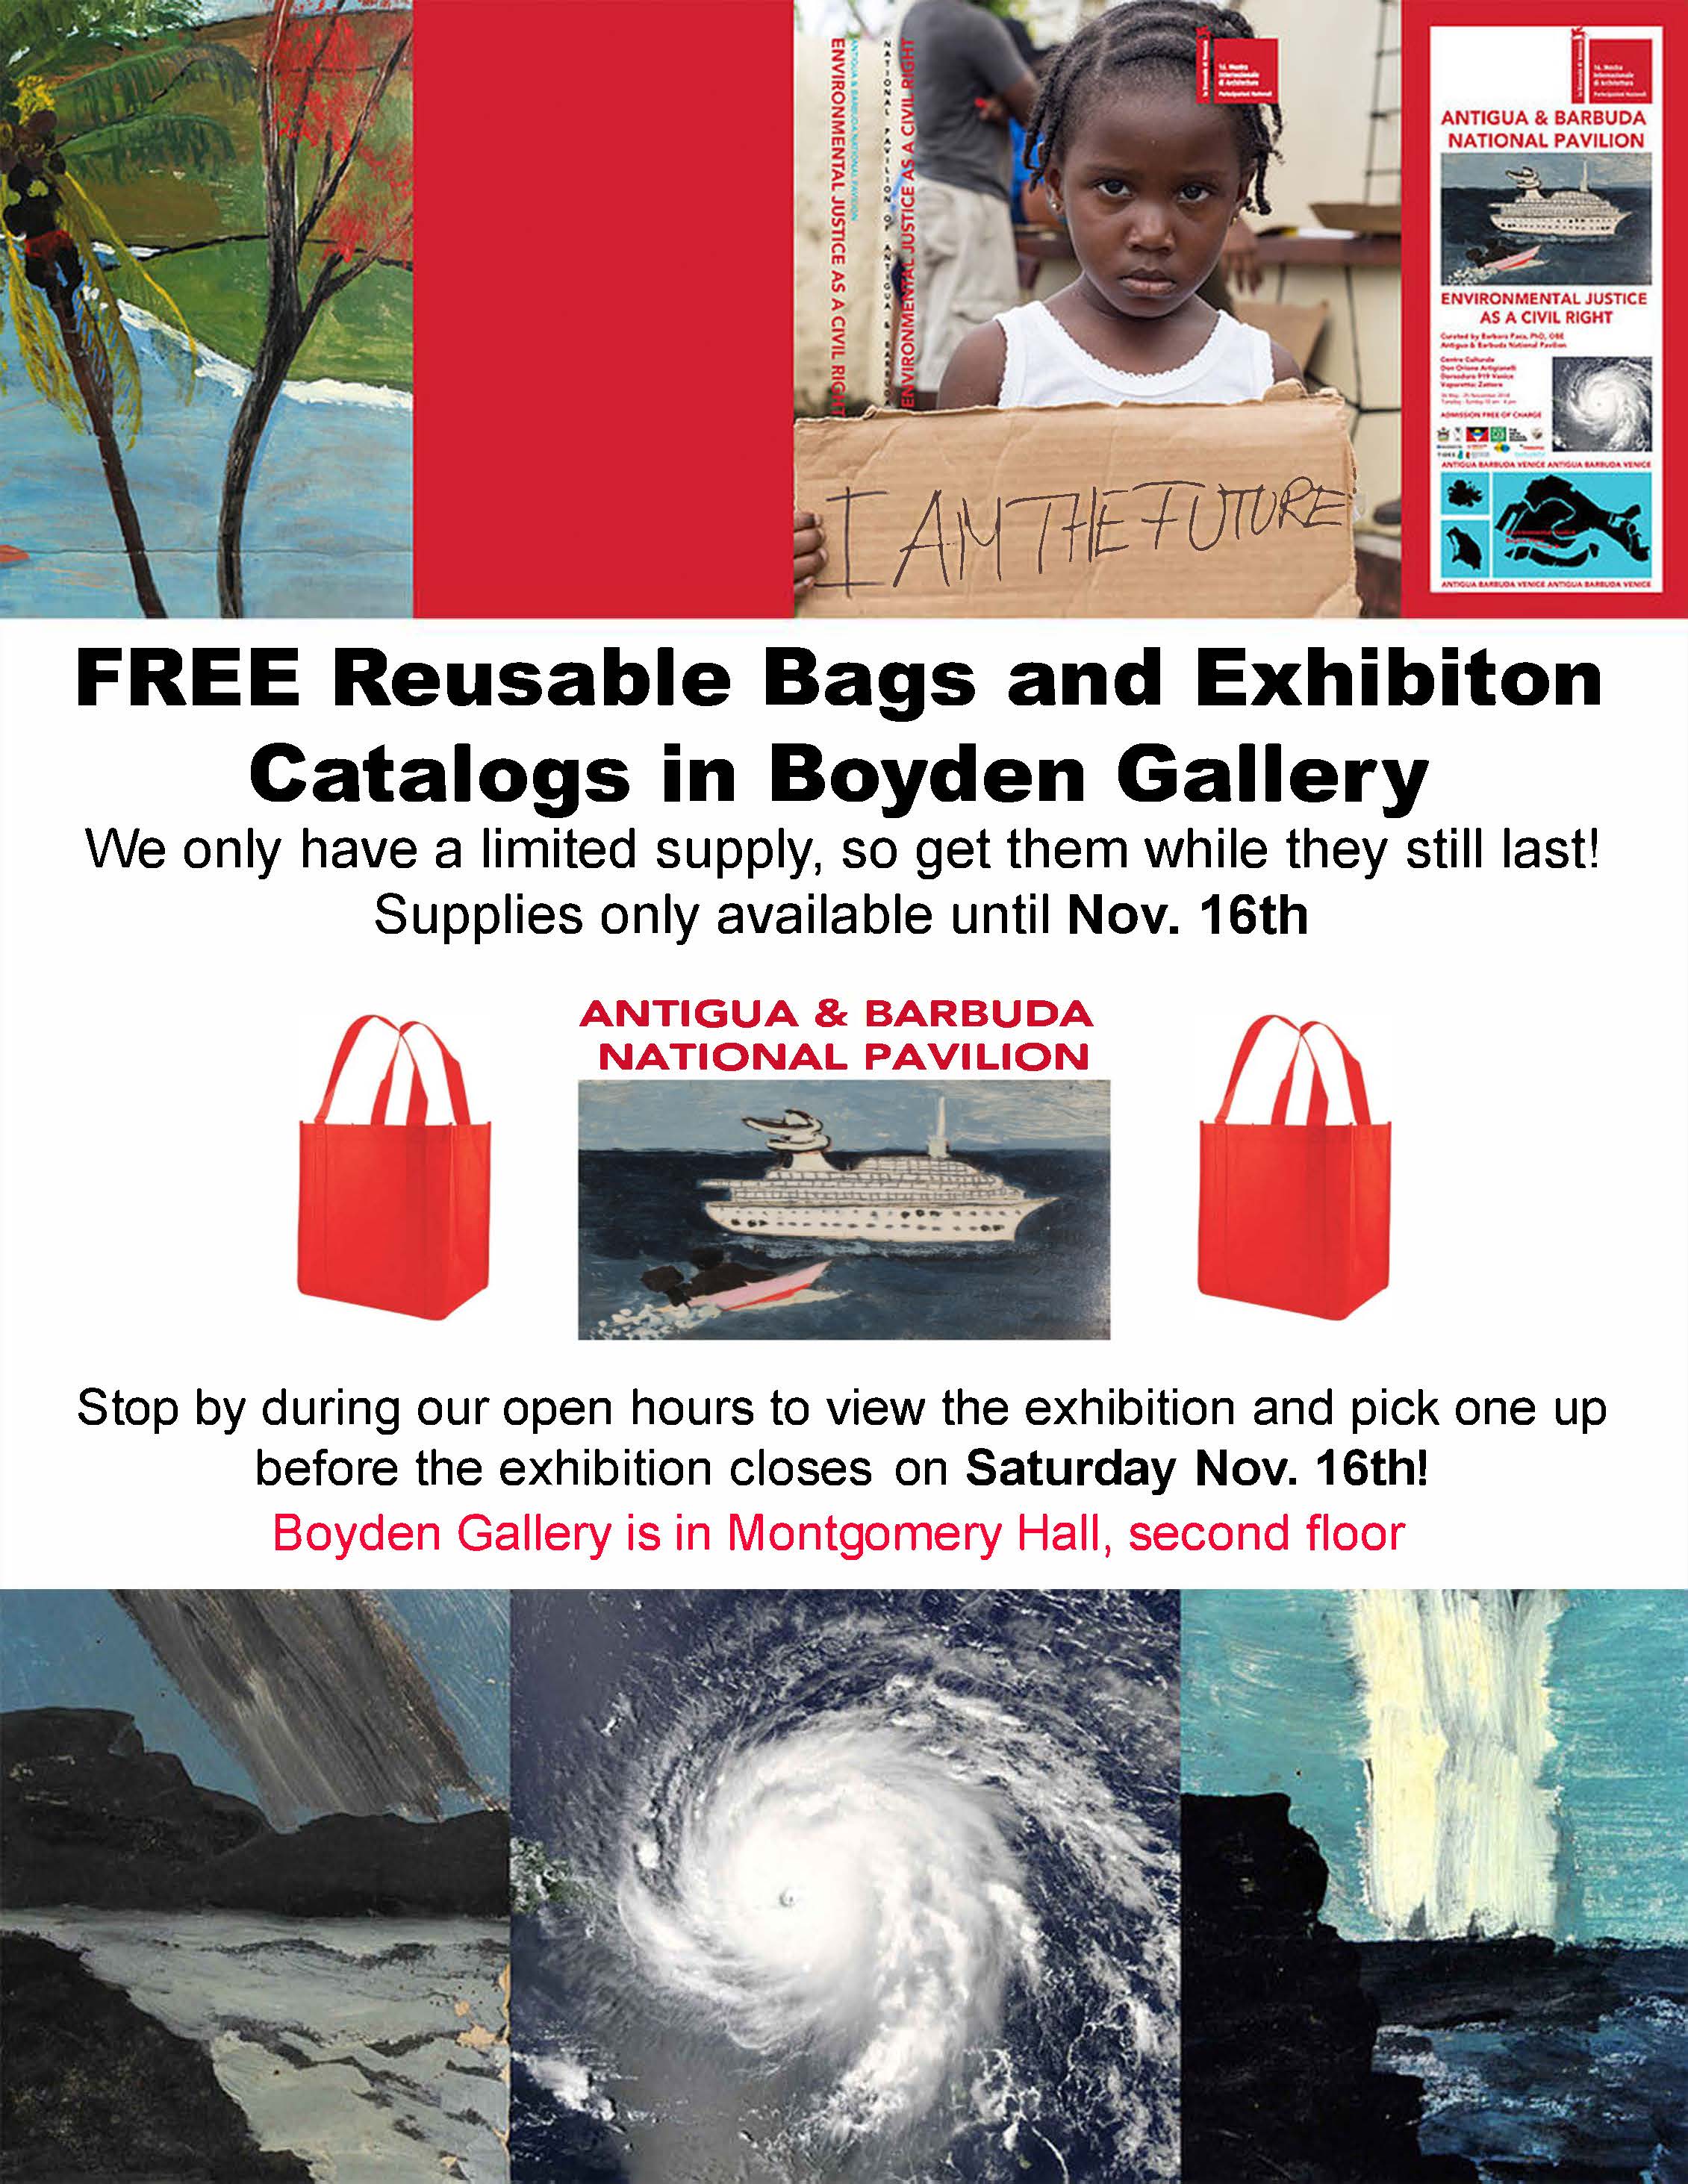 FREE Reusable Bags and Exhibition Catalogs in Boyden Gallery